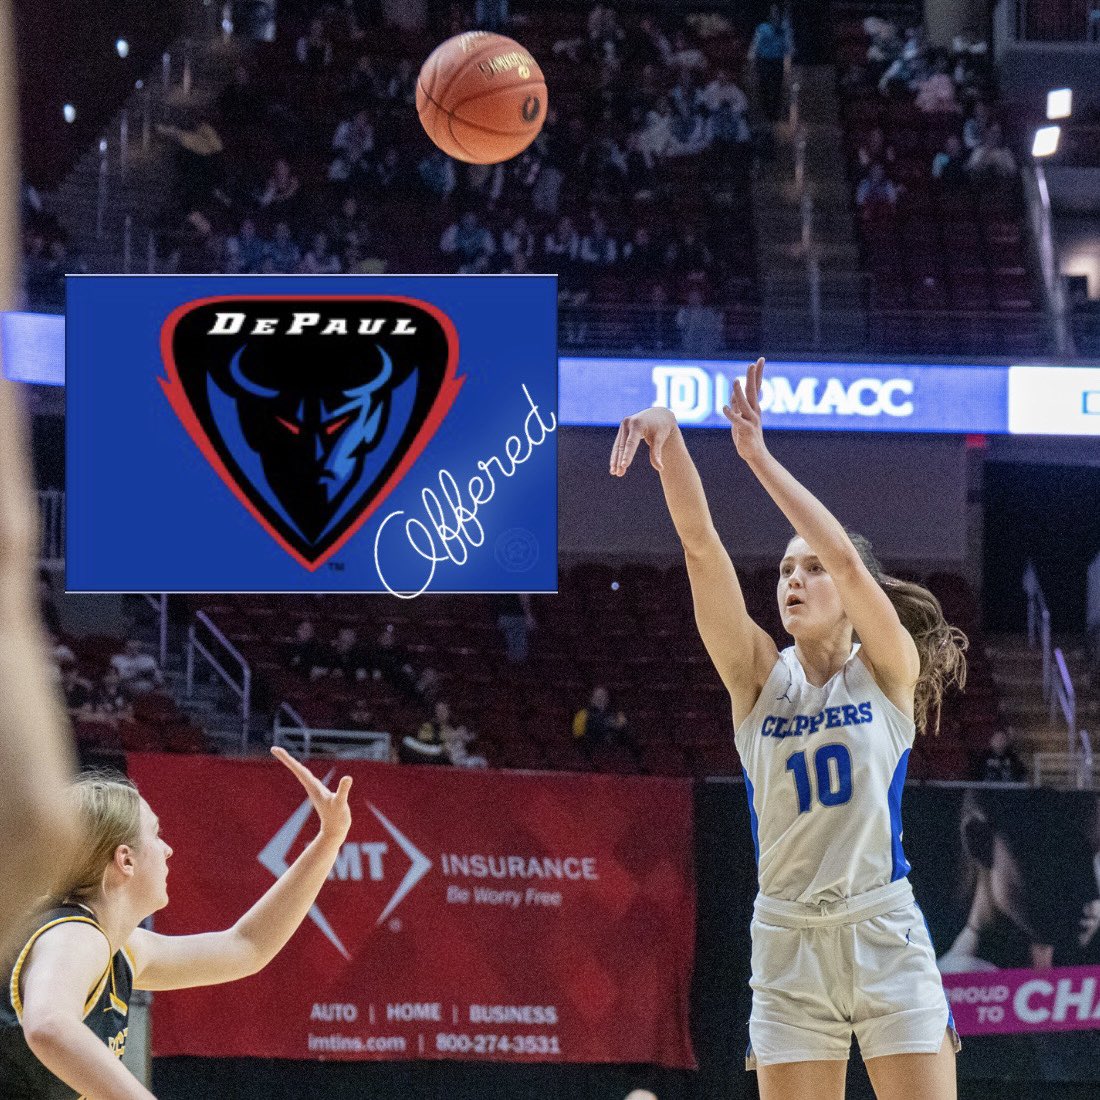 Thank you @DePaulWBBHoops for the offer! I am looking forward to learning more about the blue demon program!